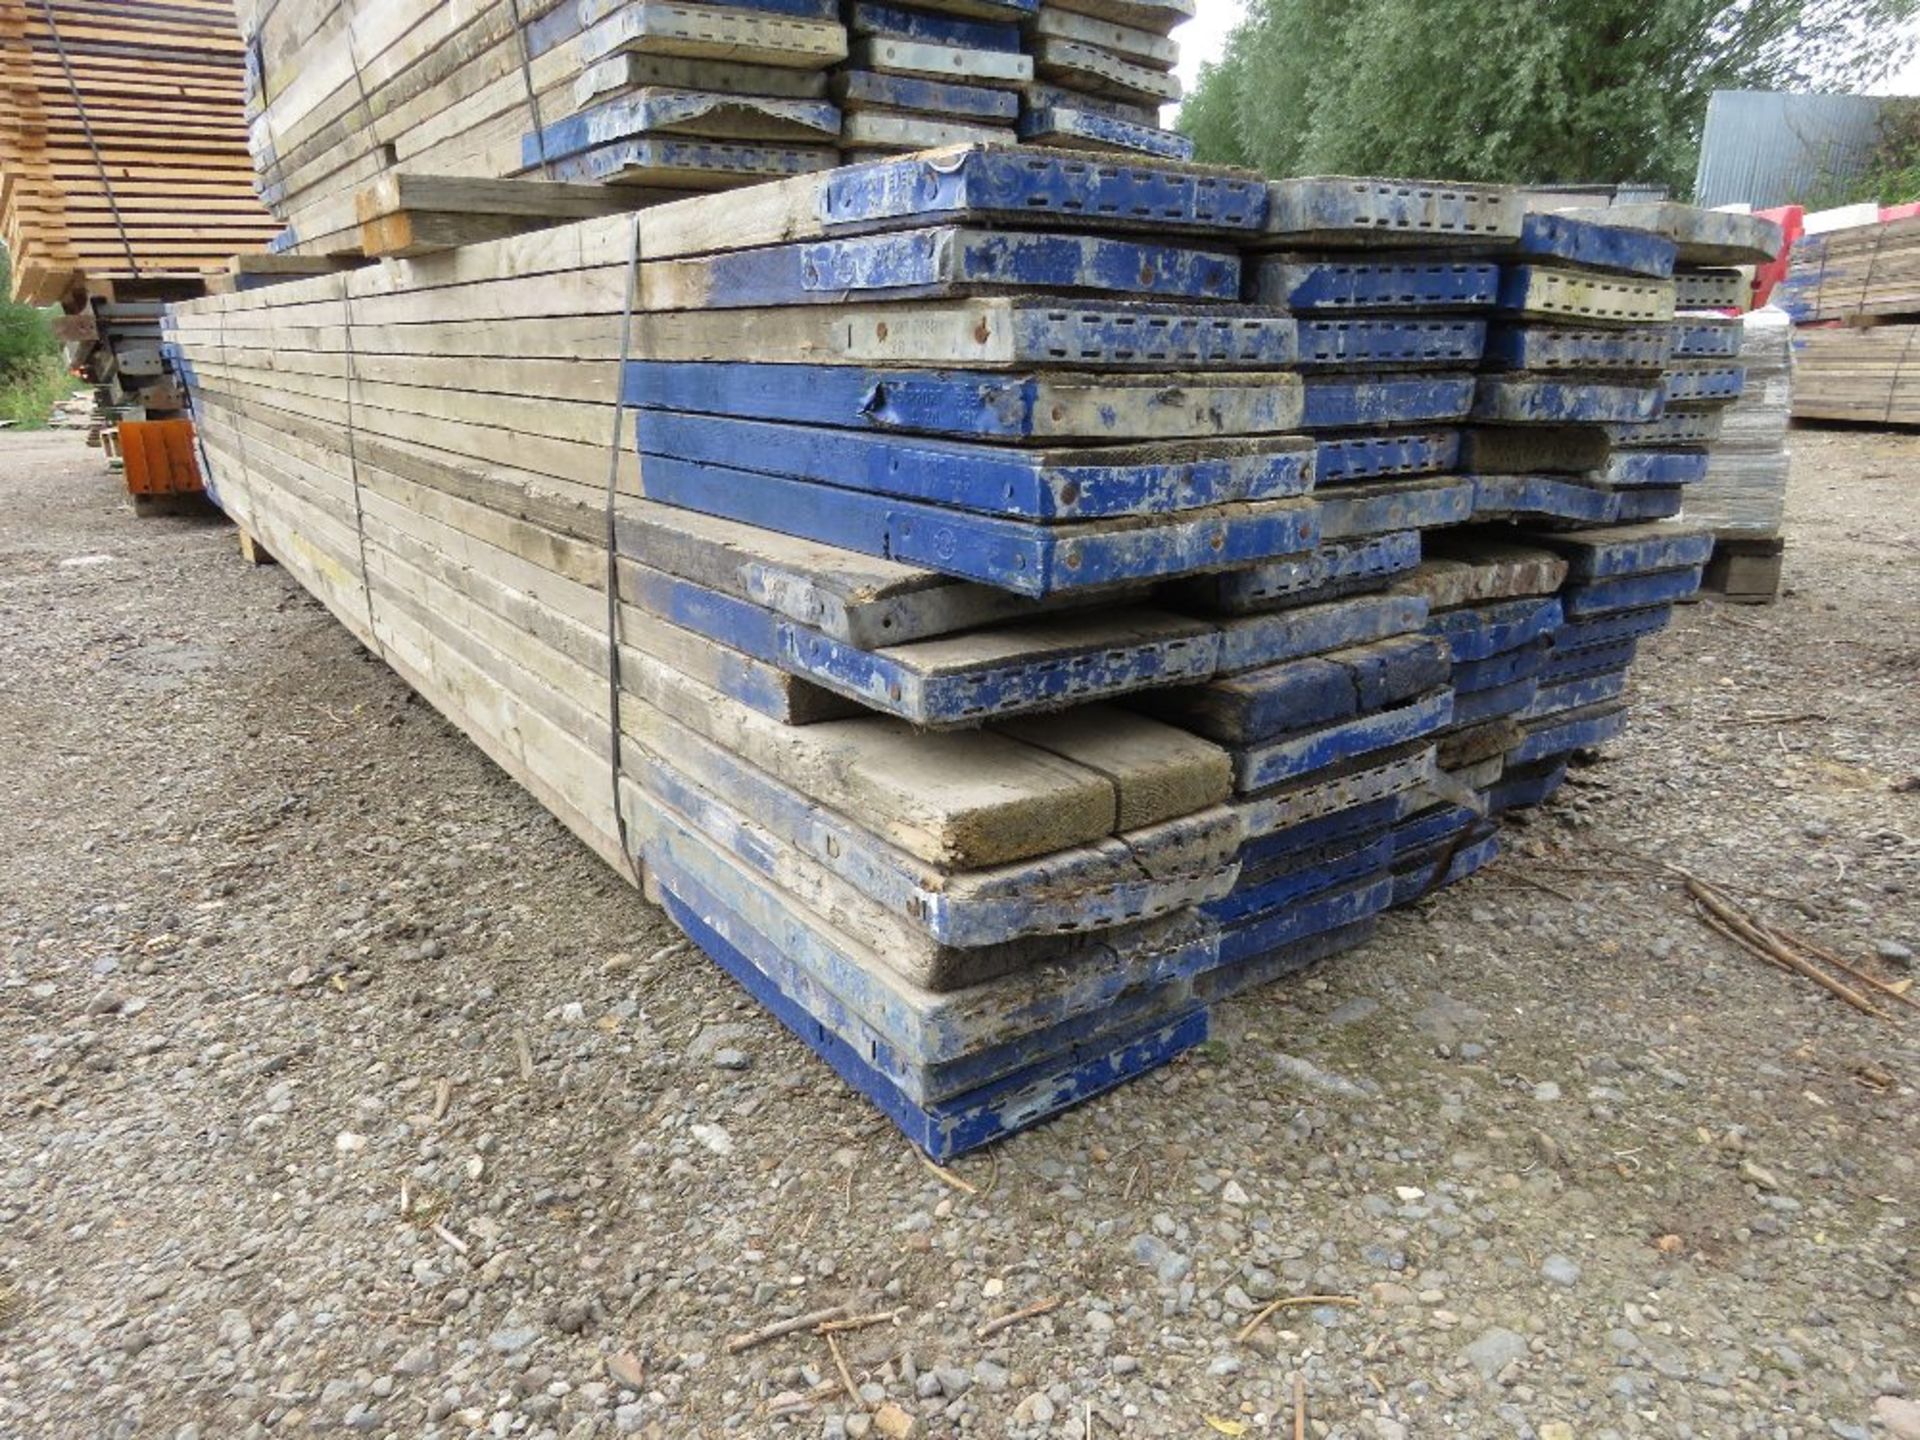 STACK OF 60 X PRE USED SCAFFOLD BOARDS, 3.9M LENGTH APPROX. THIS LOT IS SOLD UNDER THE AUCTIONEERS M